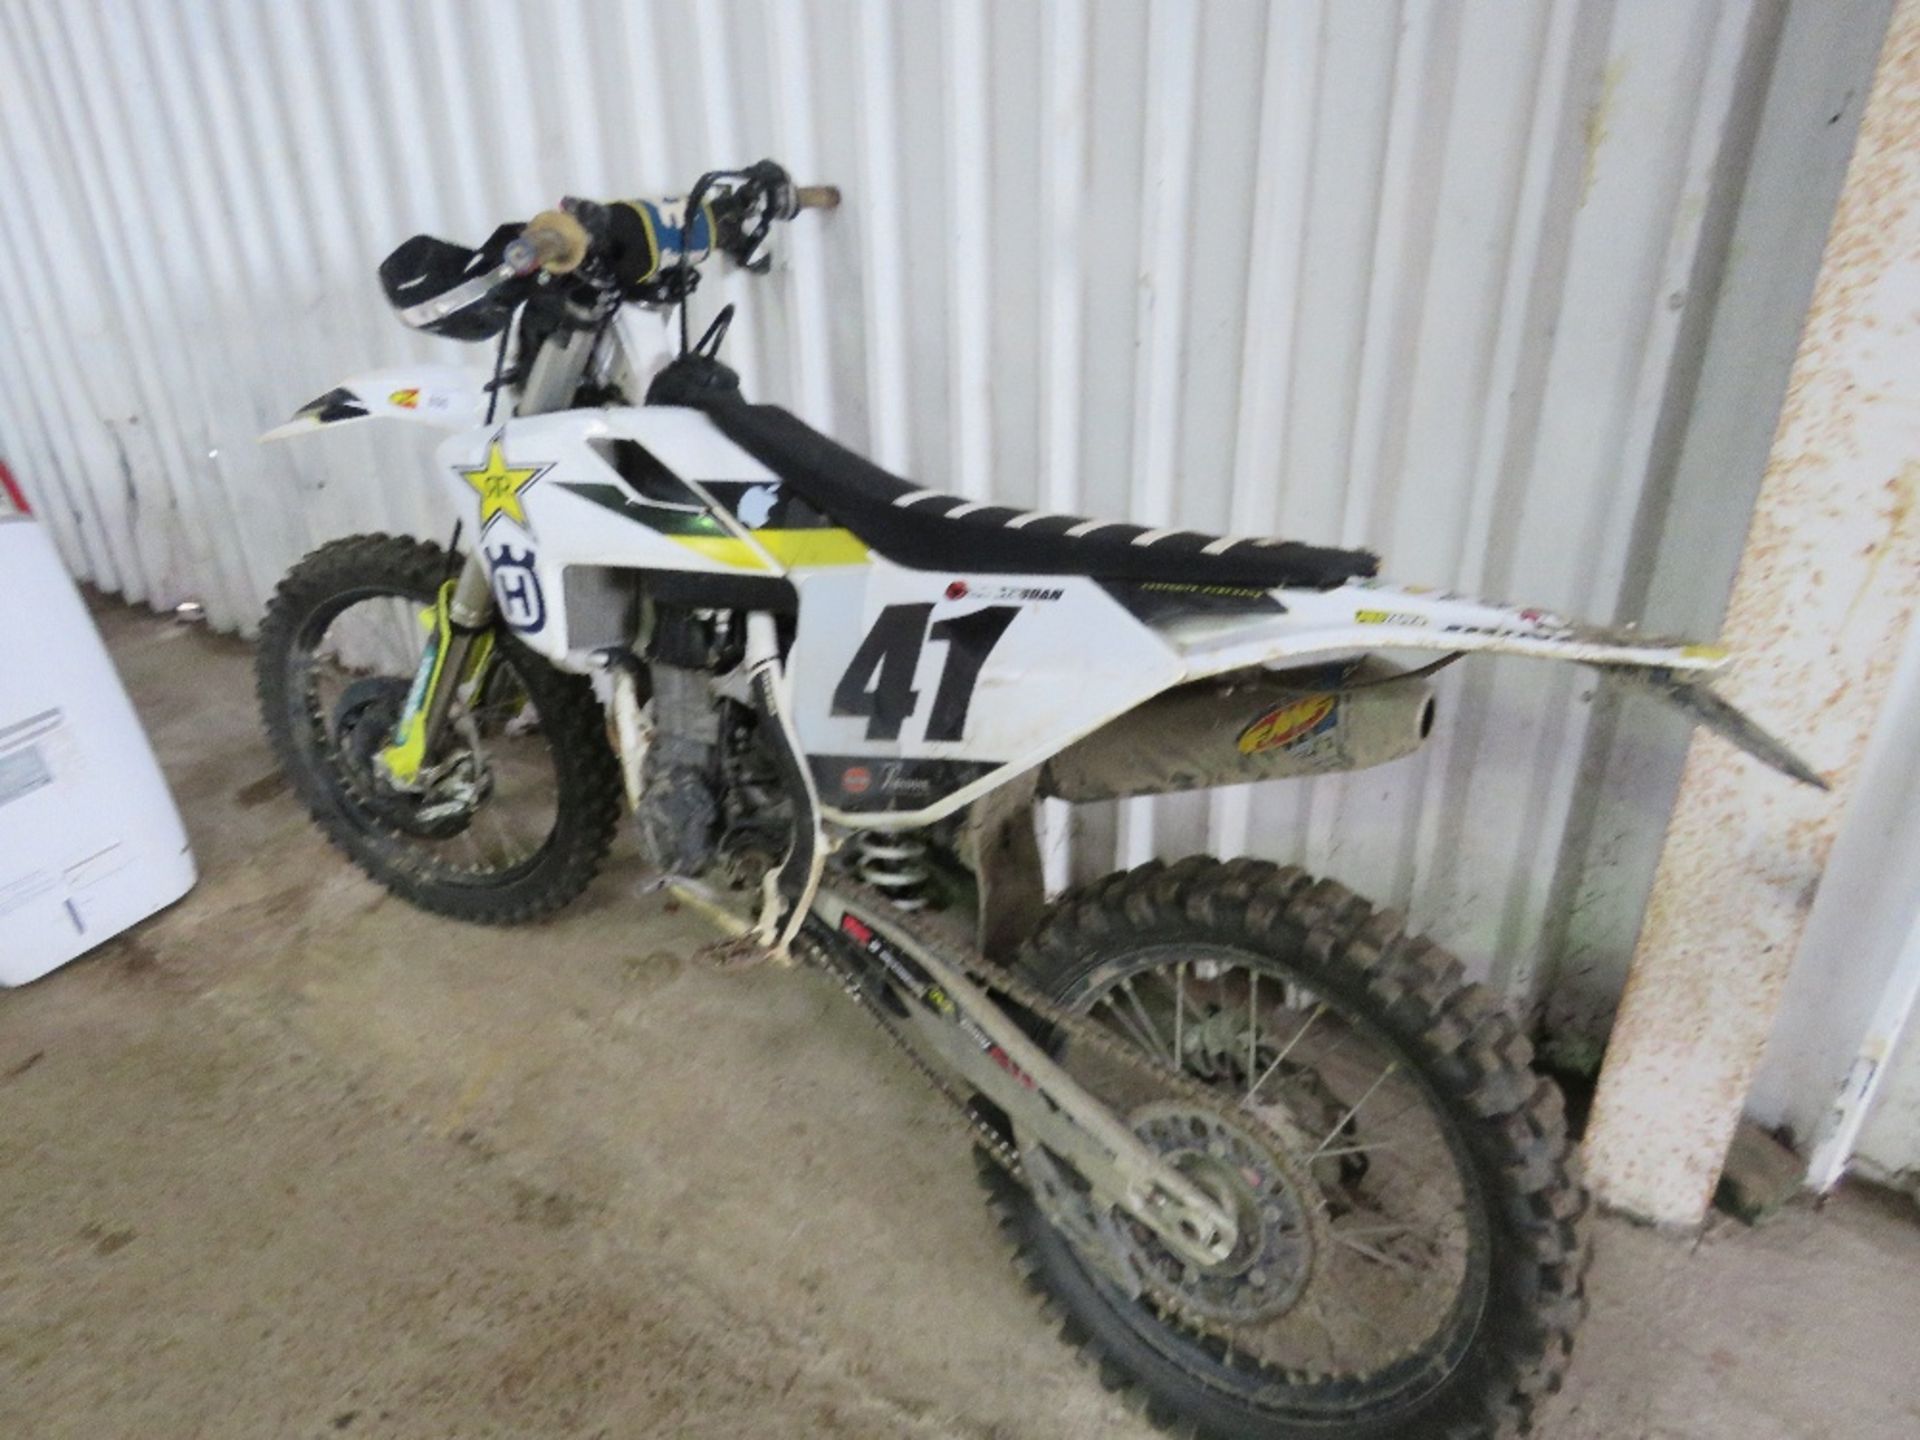 HUSQVARNA 450CC TRIALS BIKE, REG:LK18 EXO WITH V5 (FIRST ROAD REGISTERED 2021). WHEN TESTED WAS SEE - Image 3 of 15